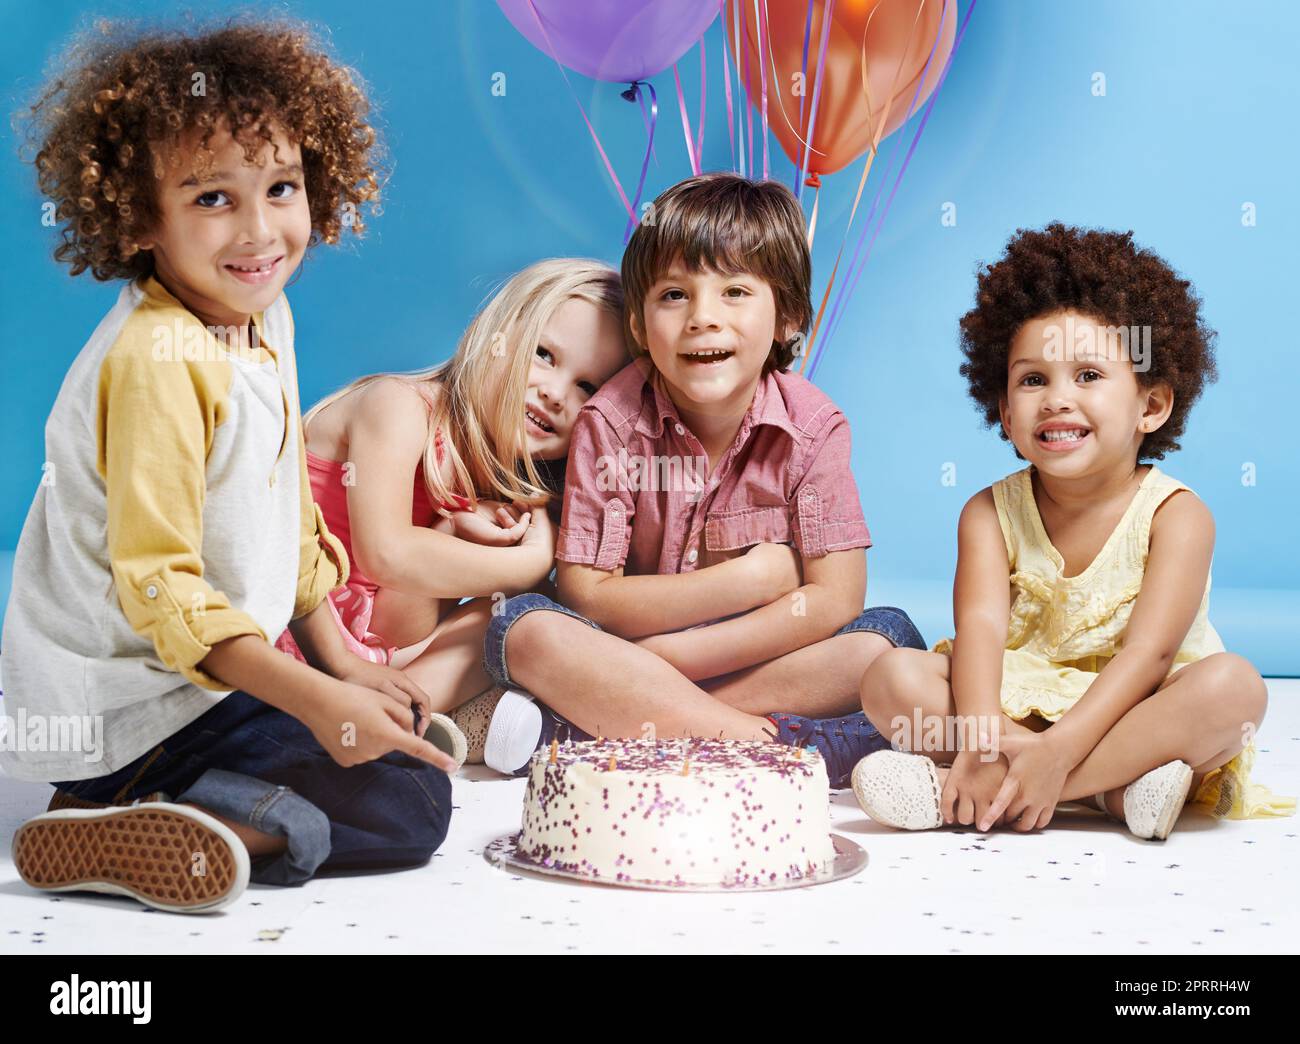 My birthday wish is to be friends forever. a group of children sitting around a birthday cake with bunch of balloons in the background. Stock Photo